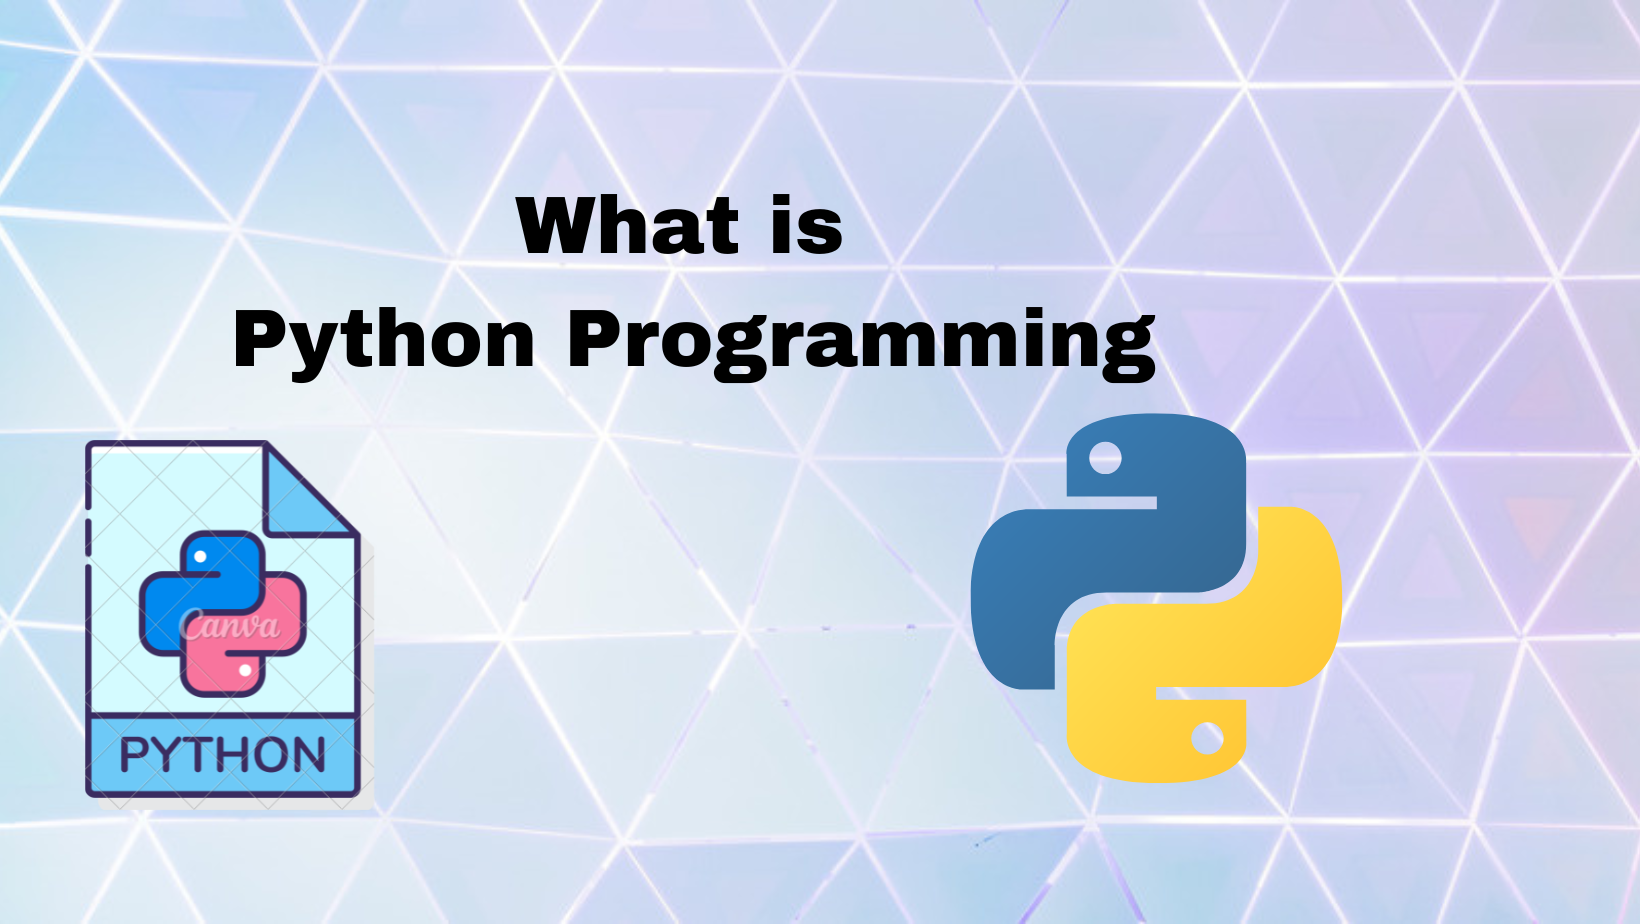 What is Python Programming